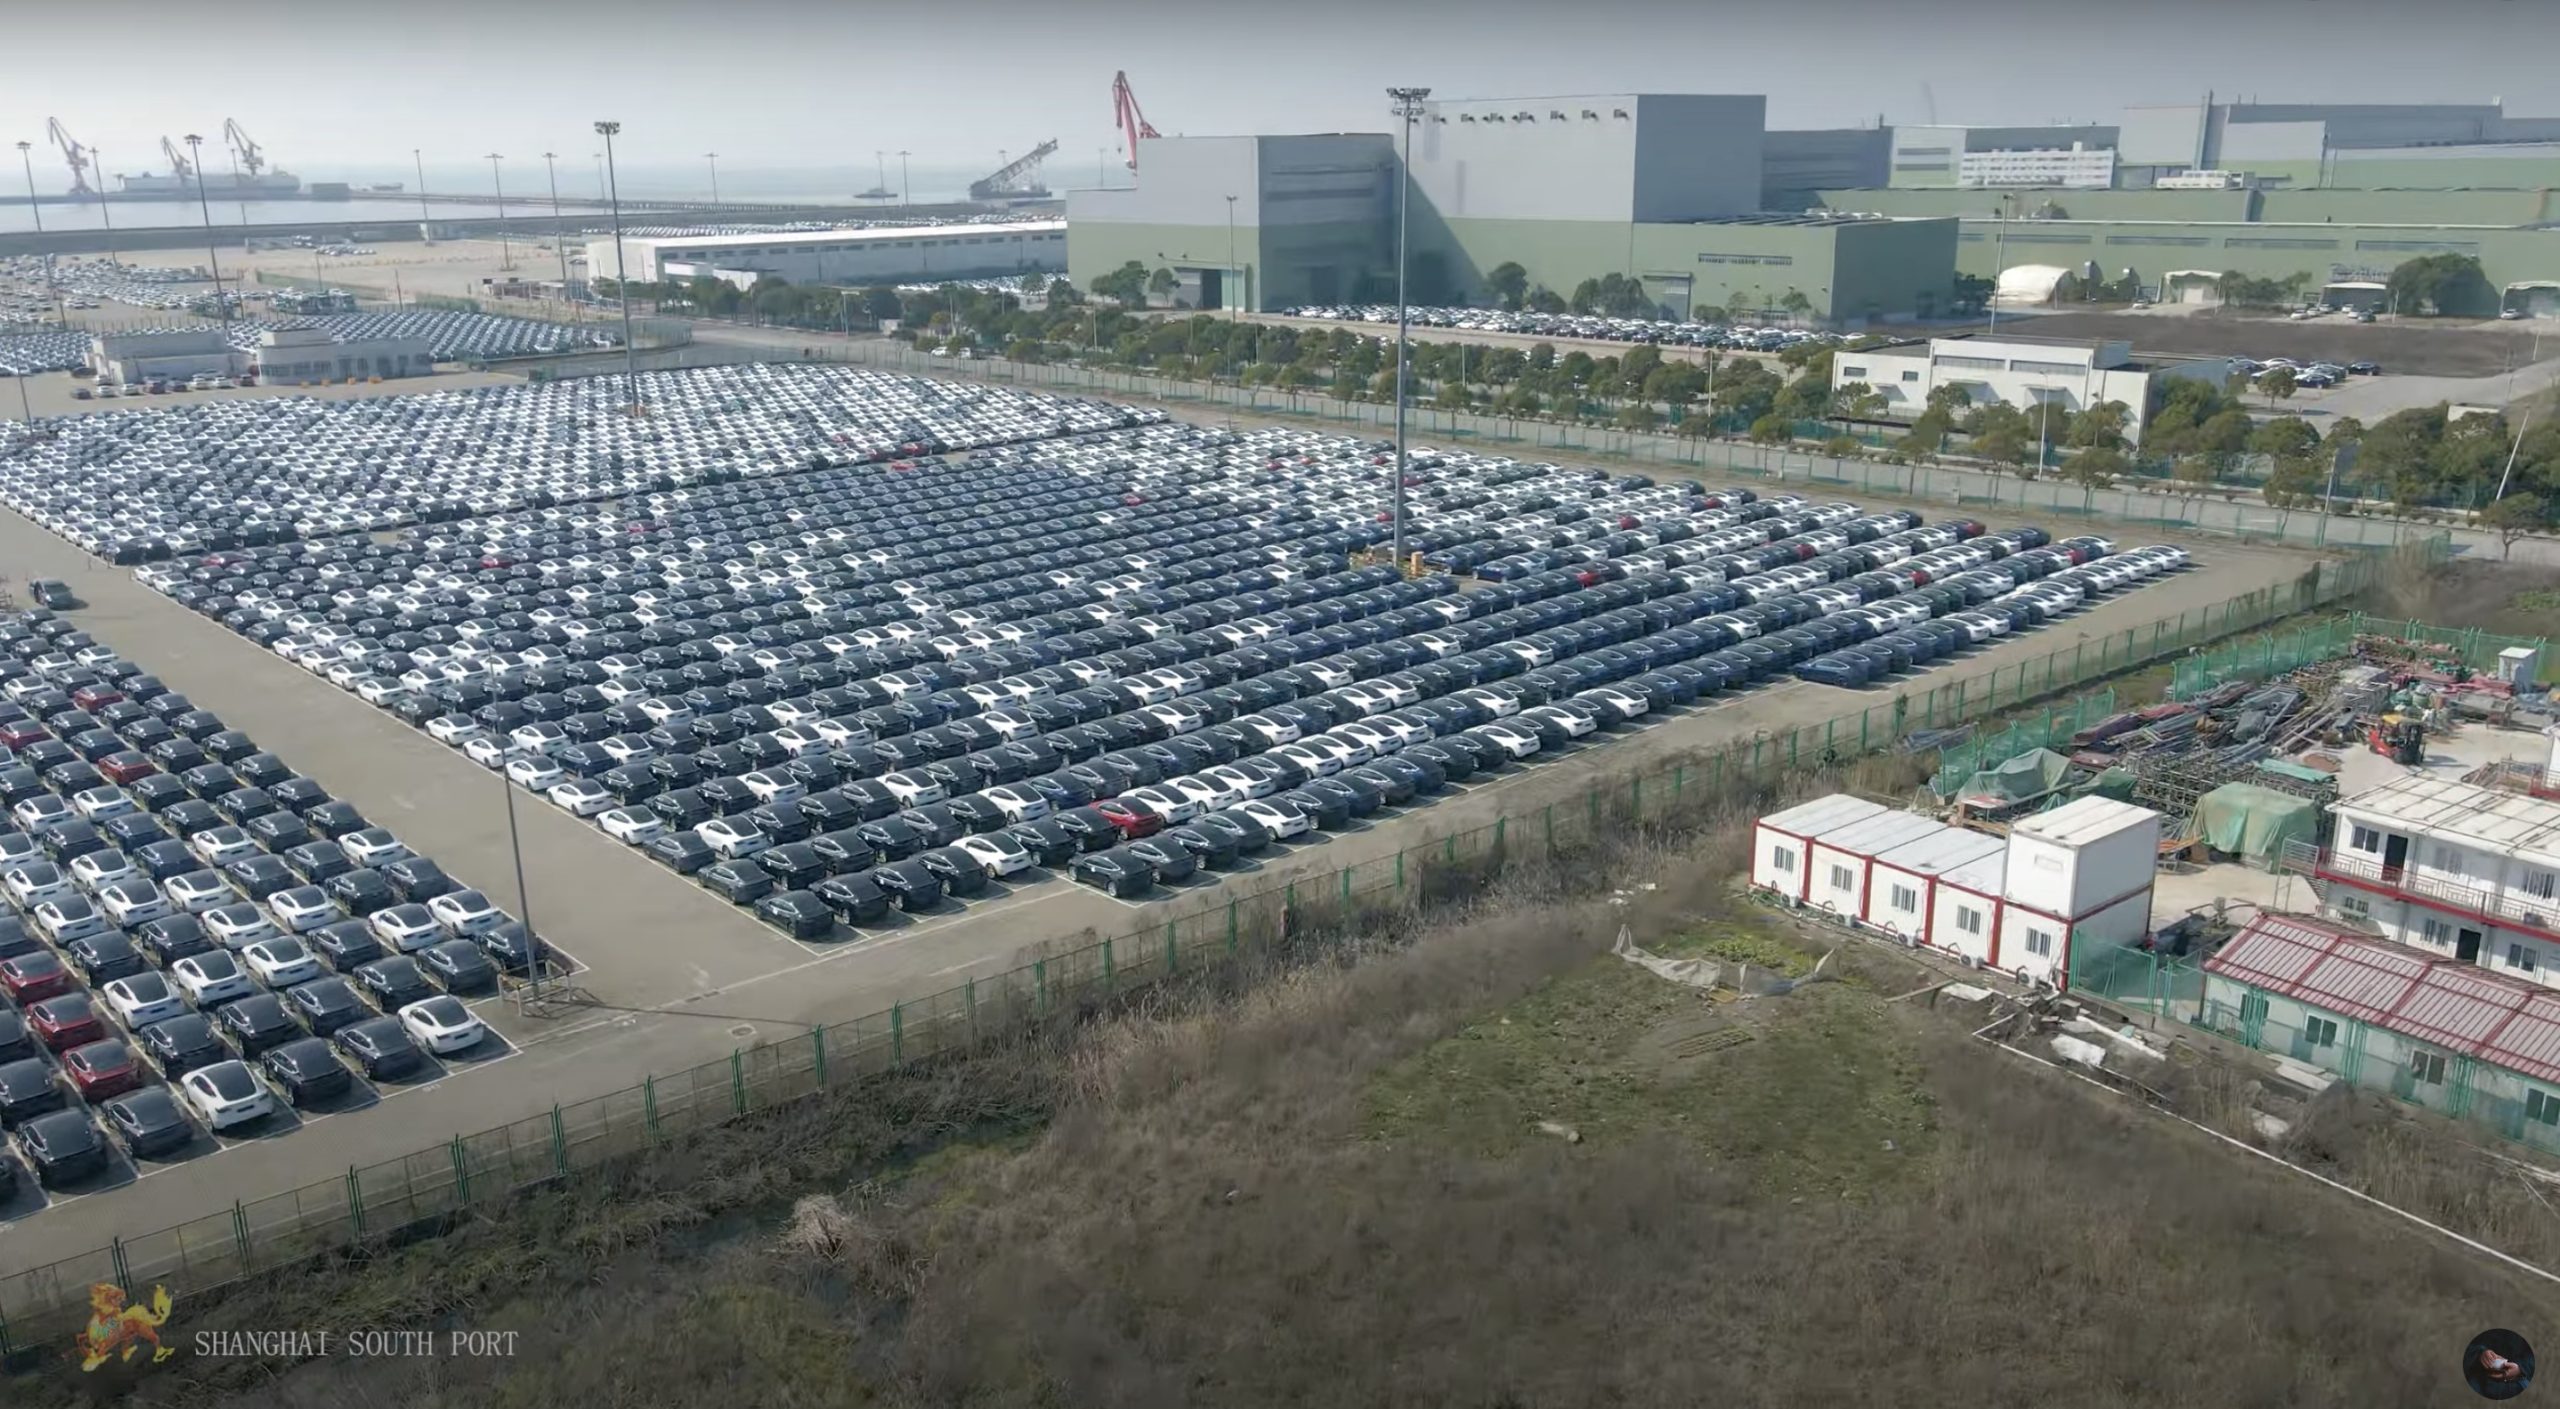 Tesla ships extra autos from China to North America